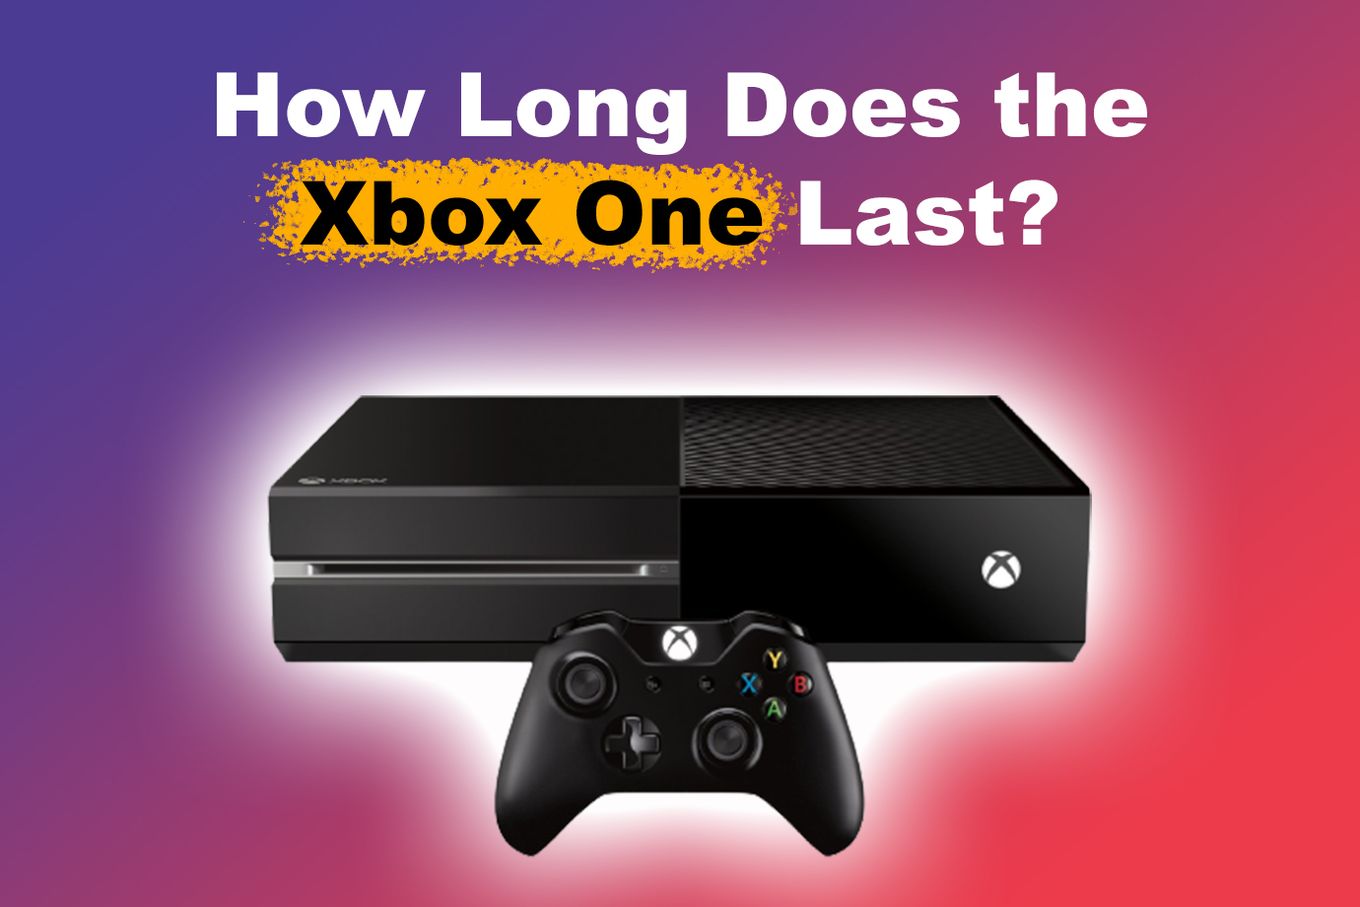 How Long Does an Xbox One Last?